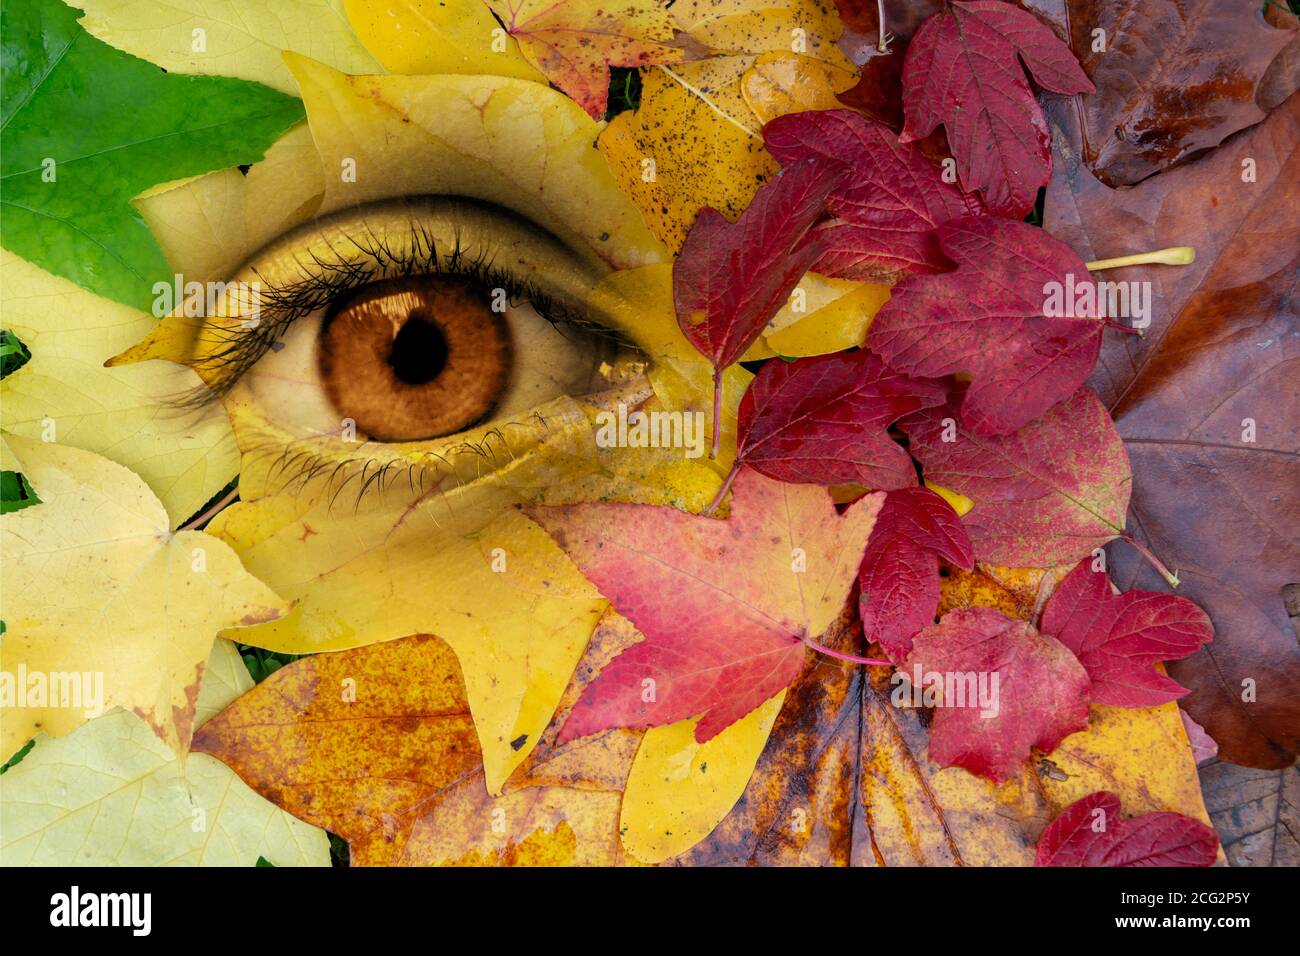 Eye in a background of autumul leaves. Earth, environment, living nature personification concept. Surreal digital collage. Stock Photo